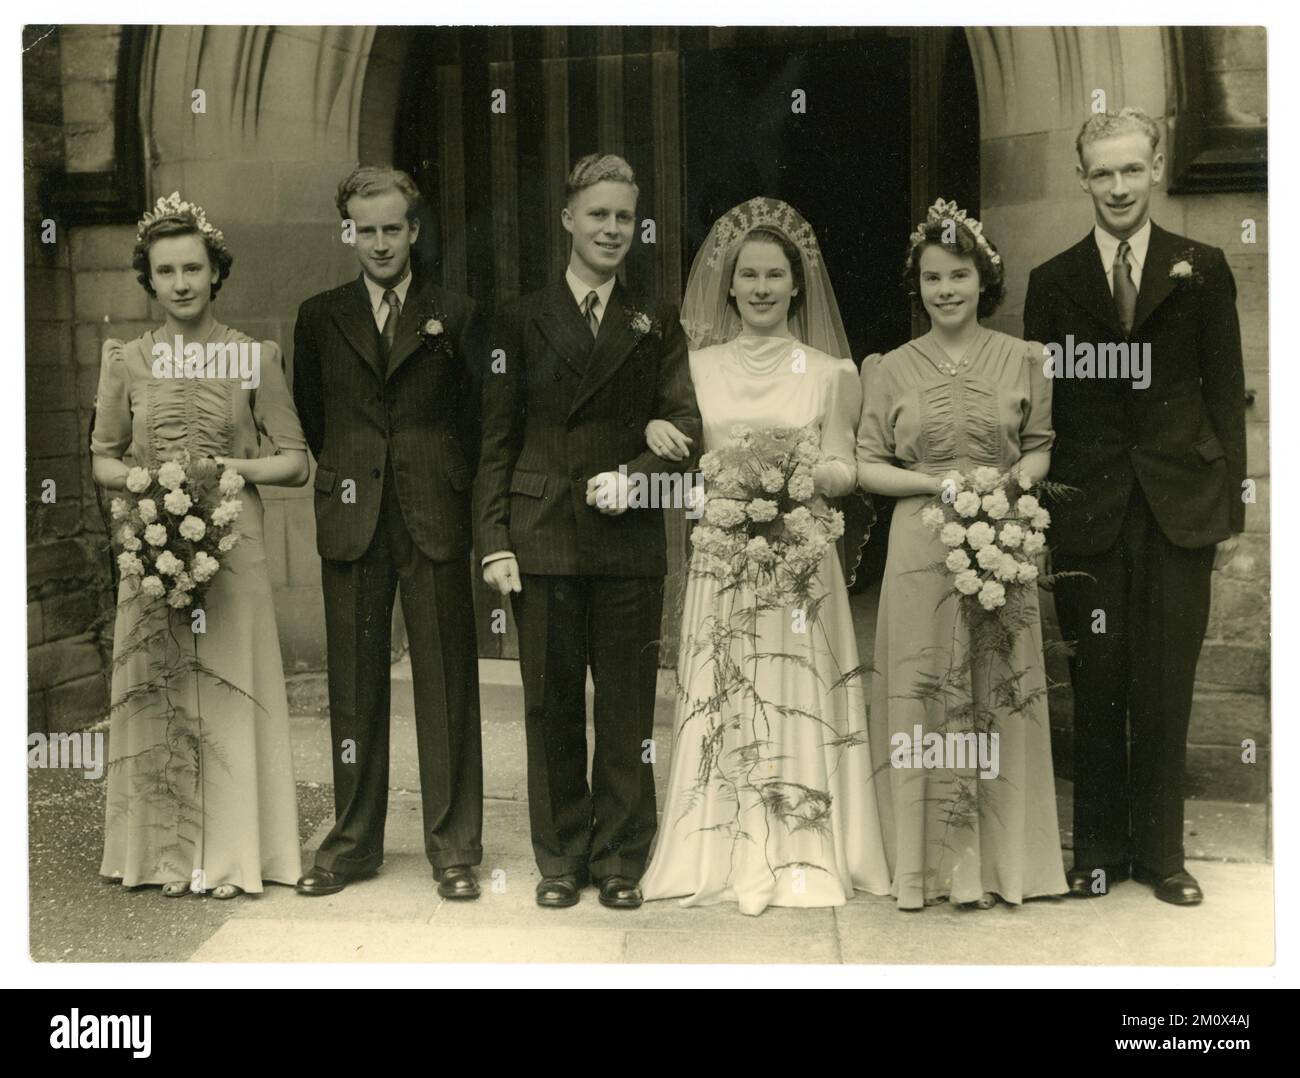 Original WW2 era wedding photograph group portrait of a happy pretty bride, wearing a white bridal gown, with puff sleeves and headdress with veil, bridegroom and best man in suits and attractive bridesmaids again wearing dresses with puff sleeves, standing outside a church, from London and Northern Studios, Alnwick, Northumberland, Northeastern England, U.K. Circa 1939. Stock Photo